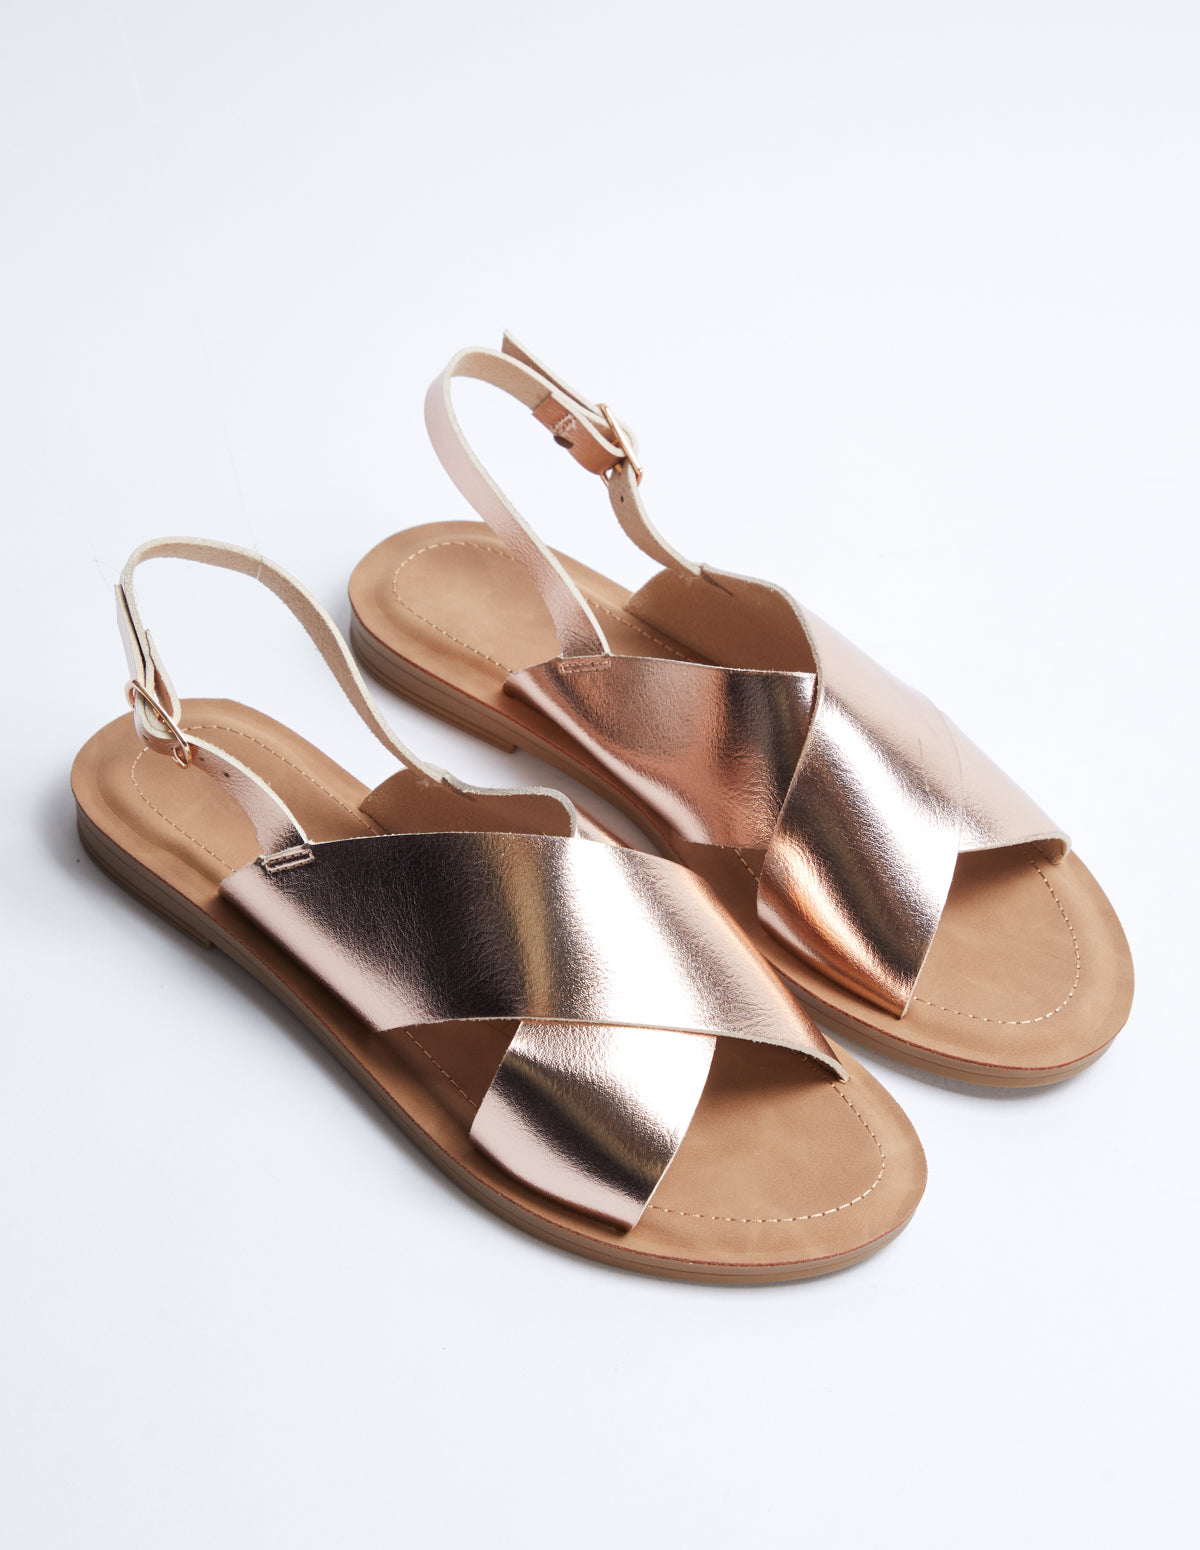 Crossover Strap Sandals - Aug